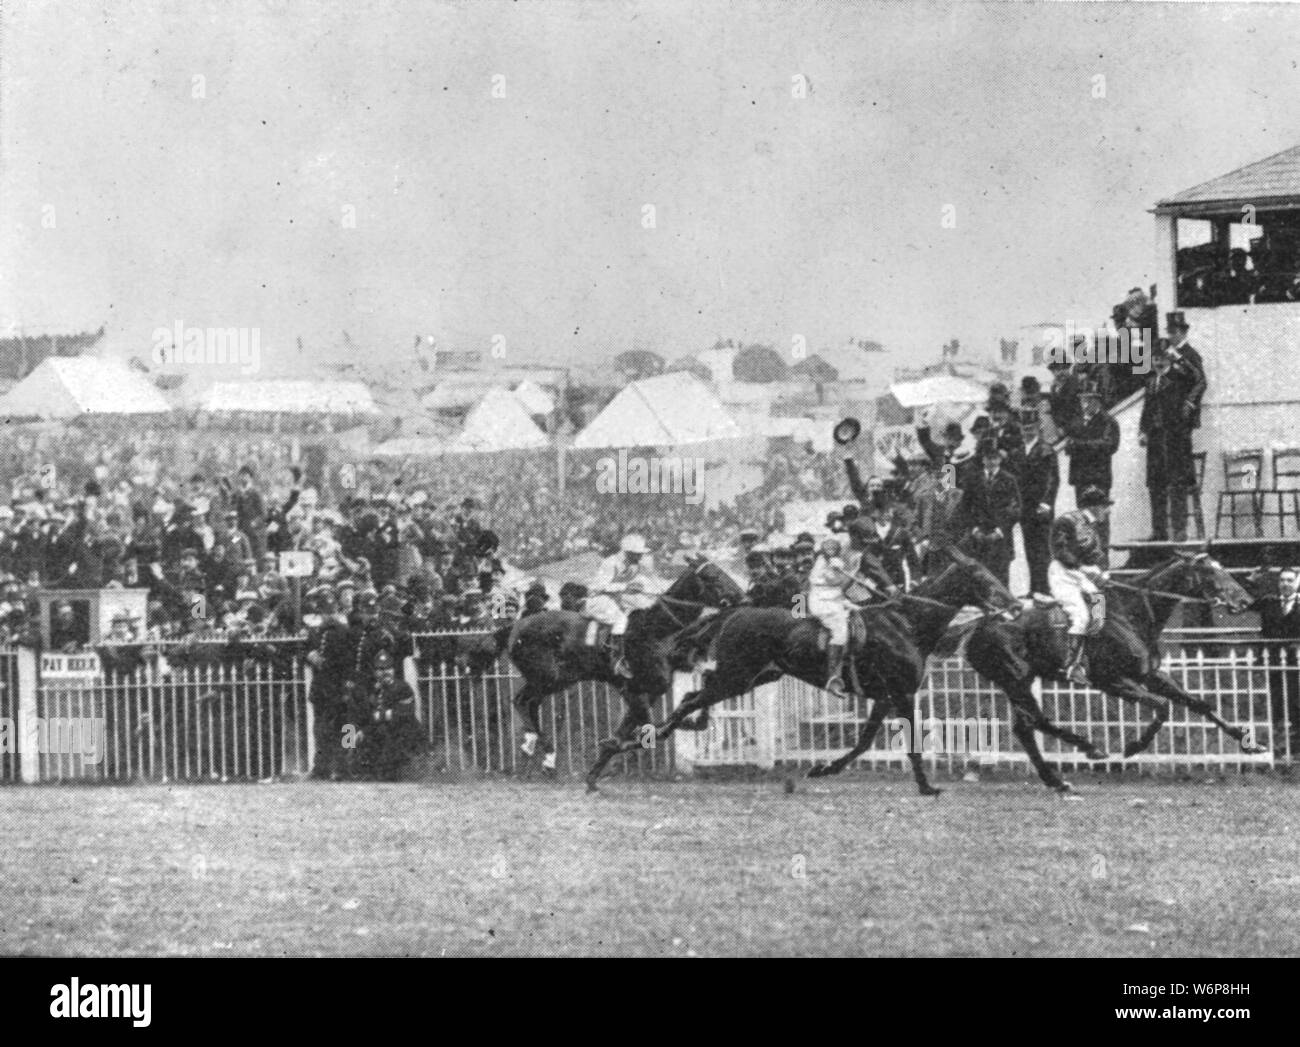 'The Prince's Second Derby, 1900: 'Diamond Jubilee' first past the post', (1901). Thoroughbred race horse owned by the Prince of Wales winning the Derby at Epsom racecourse in Surrey. Diamond Jubilee was bred by his owner, Prince Albert Edward (1841-1910), the future King Edward VII. He was foaled in 1897, the year of Queen Victoria's Diamond Jubilee. From &quot;The Illustrated London News Record of the Glorious Reign of Queen Victoria 1837-1901: The Life and Accession of King Edward VII. and the Life of Queen Alexandra&quot;. [London, 1901] Stock Photo